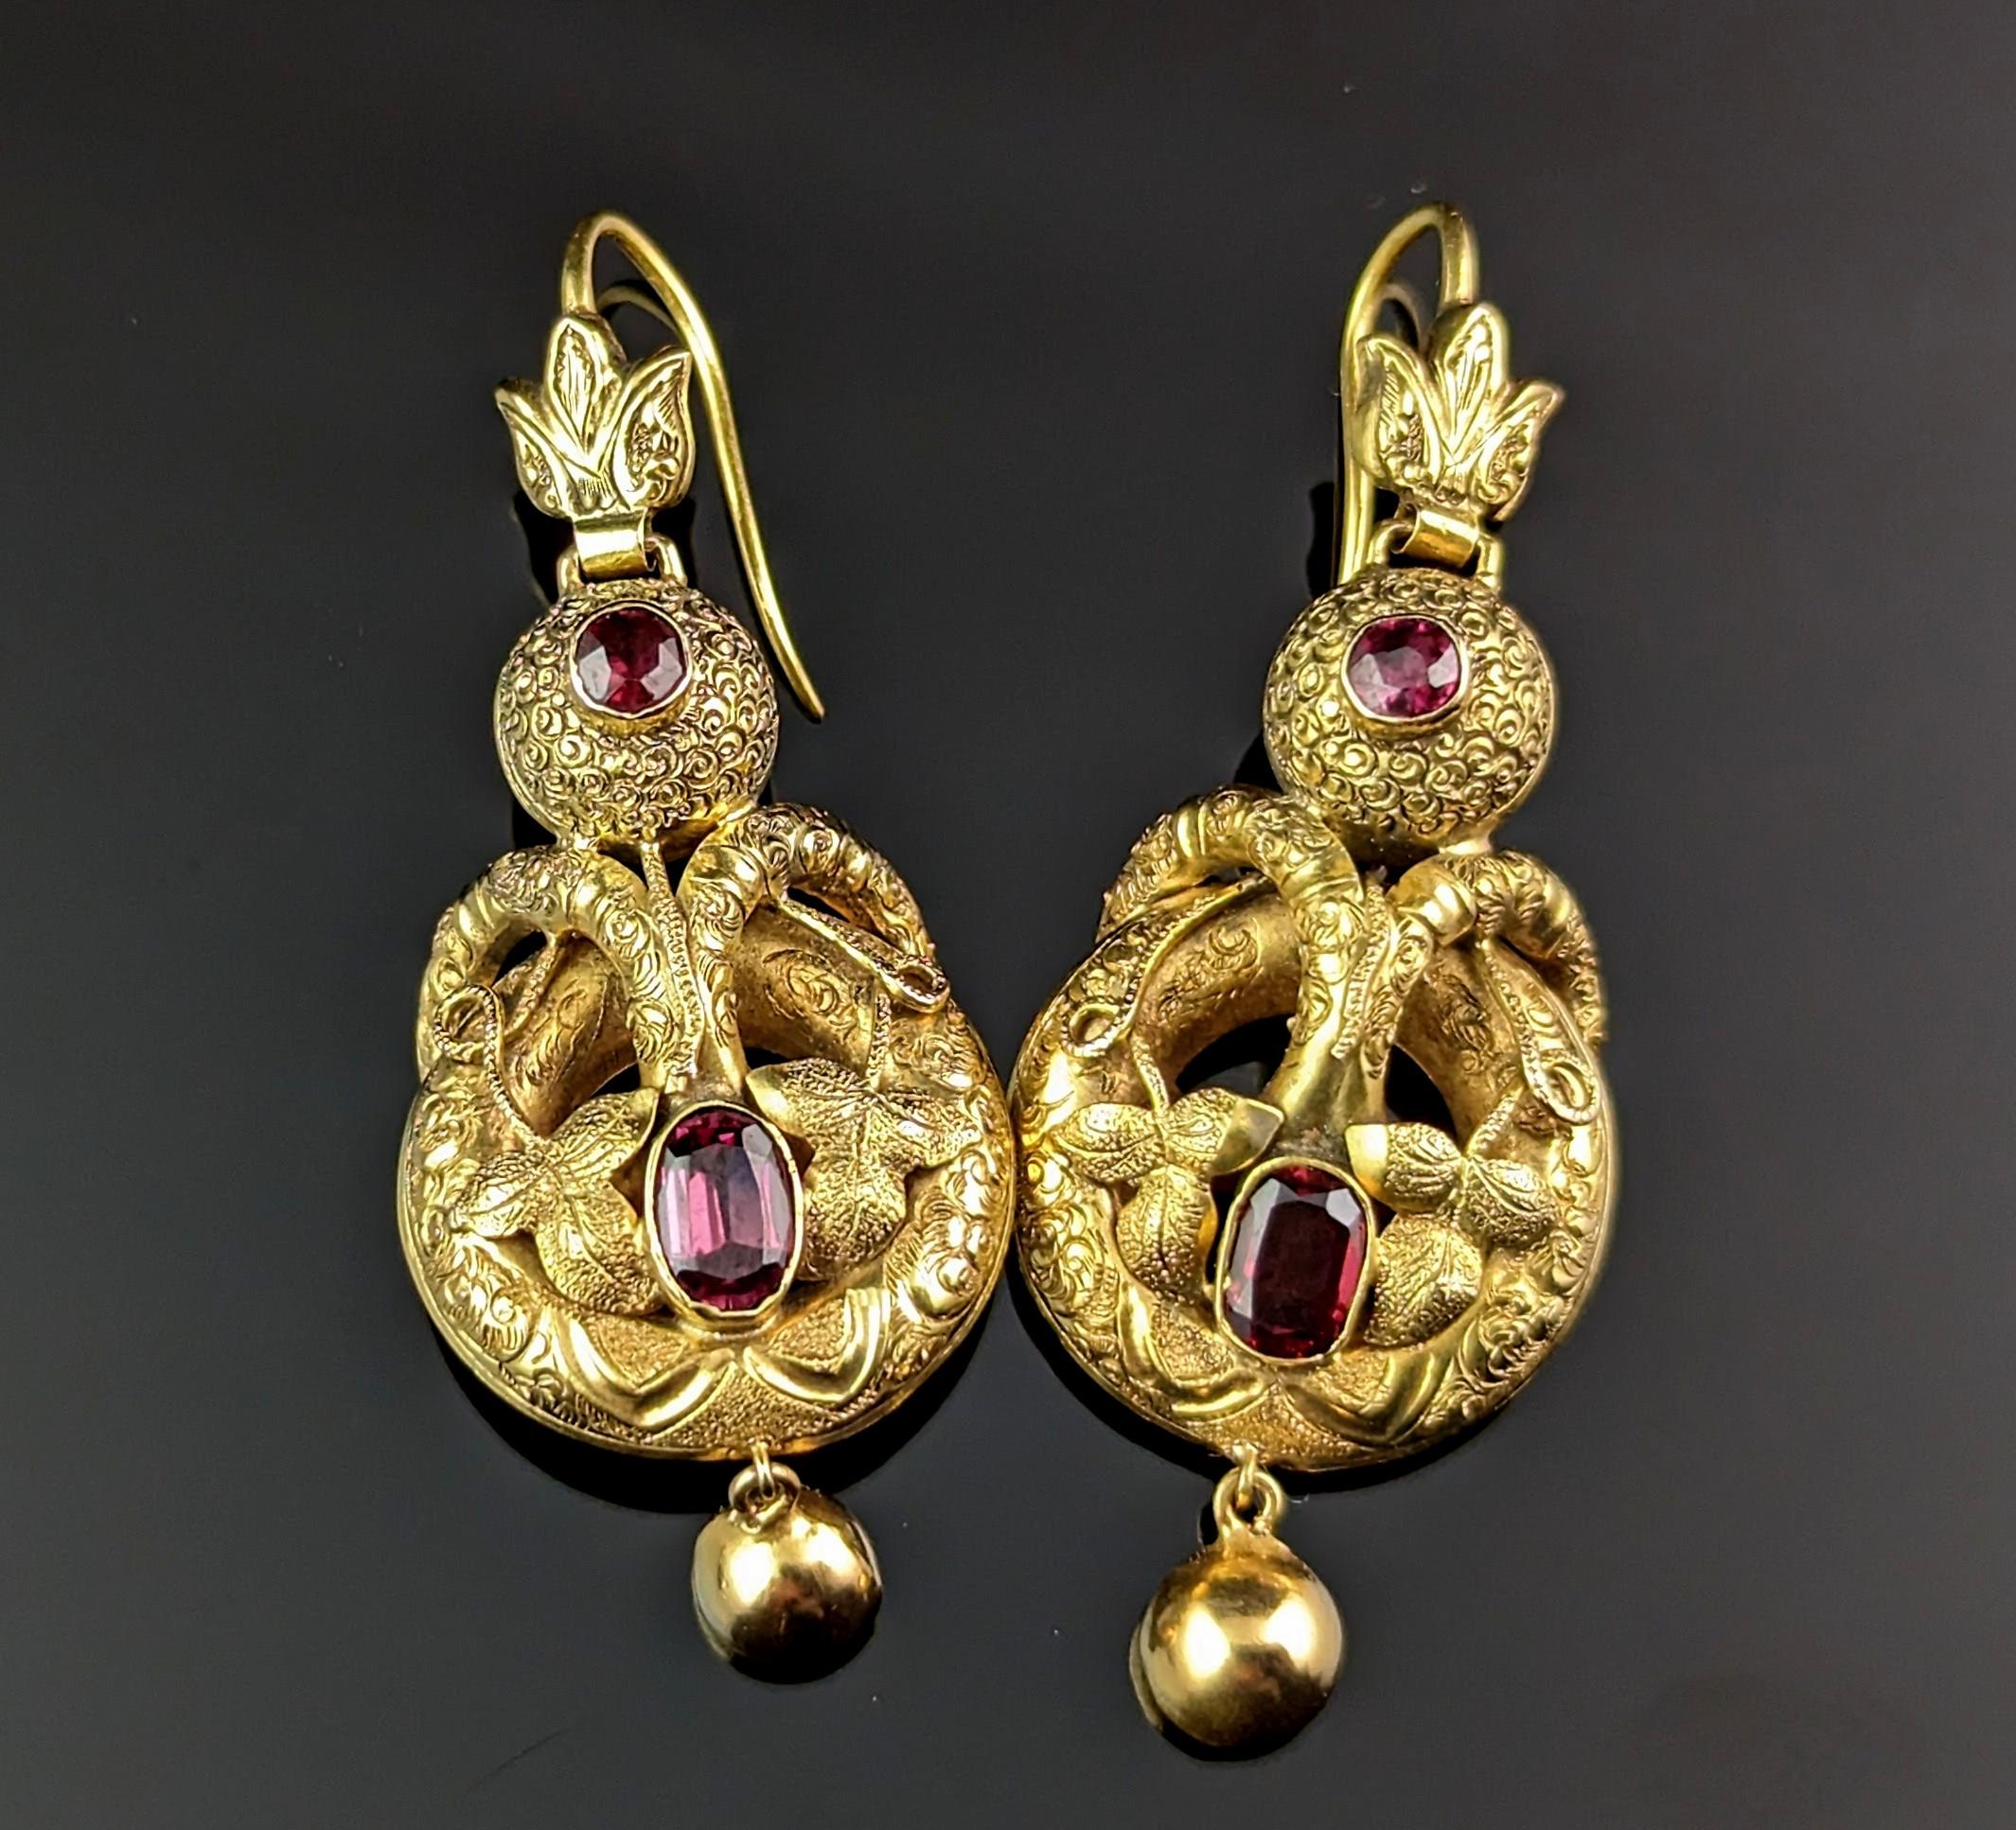 Oval Cut Antique Victorian Garnet Drop Earrings, 18 Carat Gold, Leaves and Vine For Sale